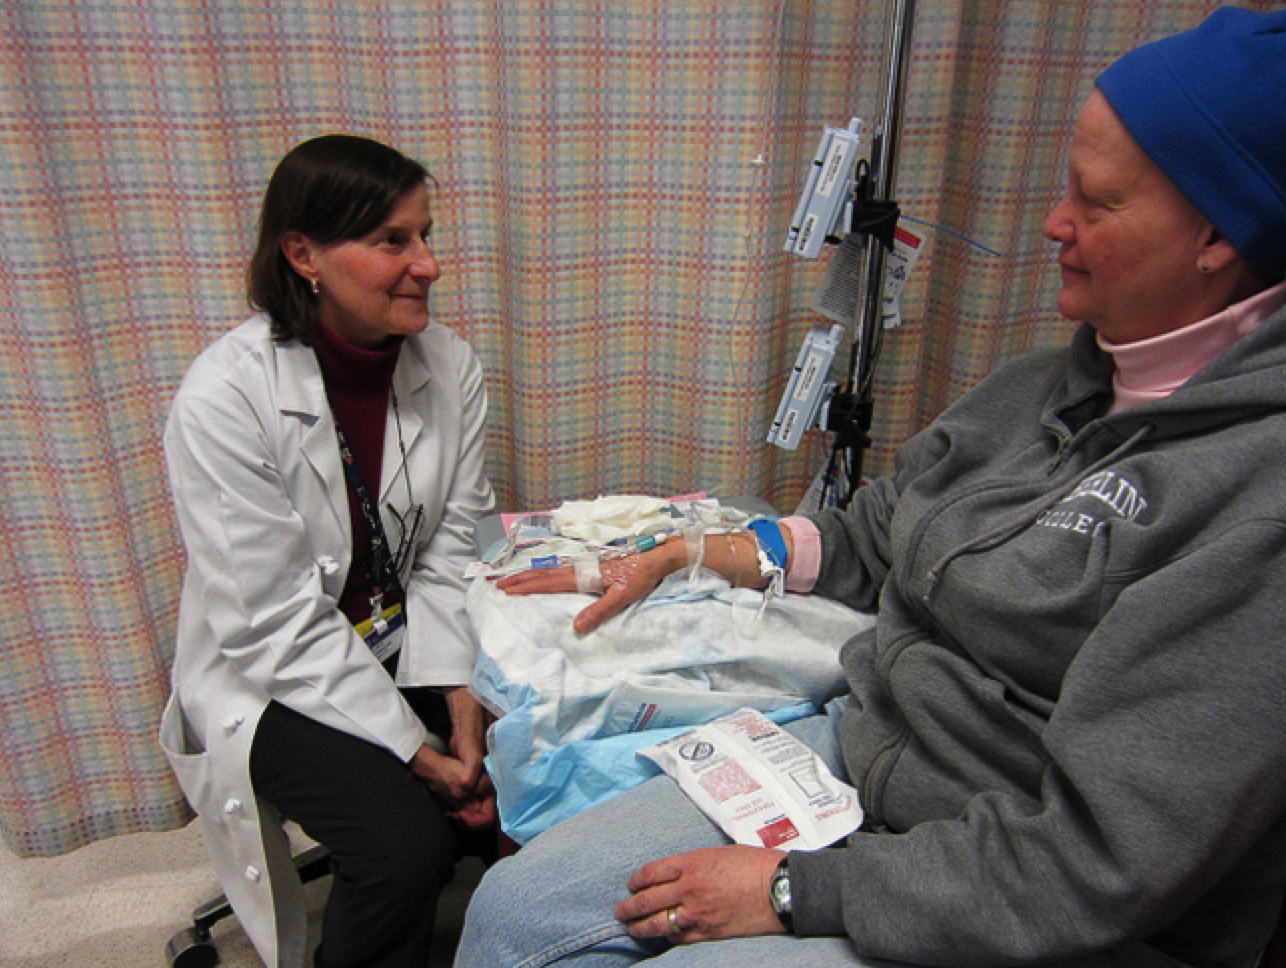 Chemotherapy practitioner and cancer patient  (Image from Flickr)